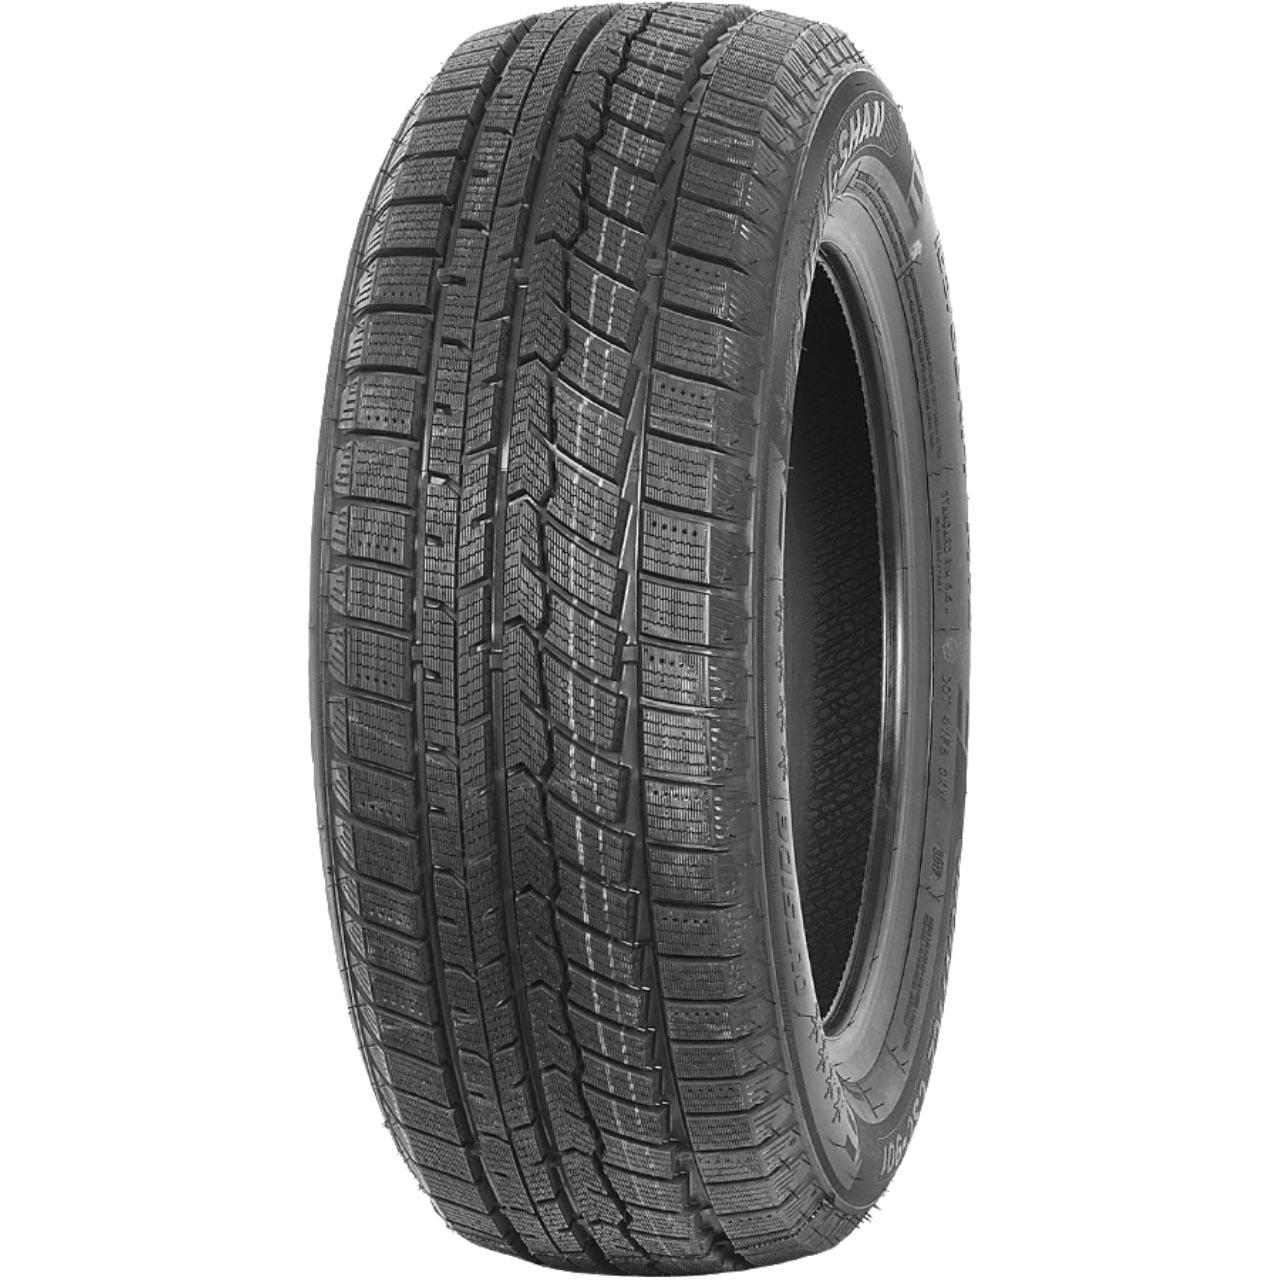 CHENGSHAN MONTICE CSC-901 225/45R17 94V BSW